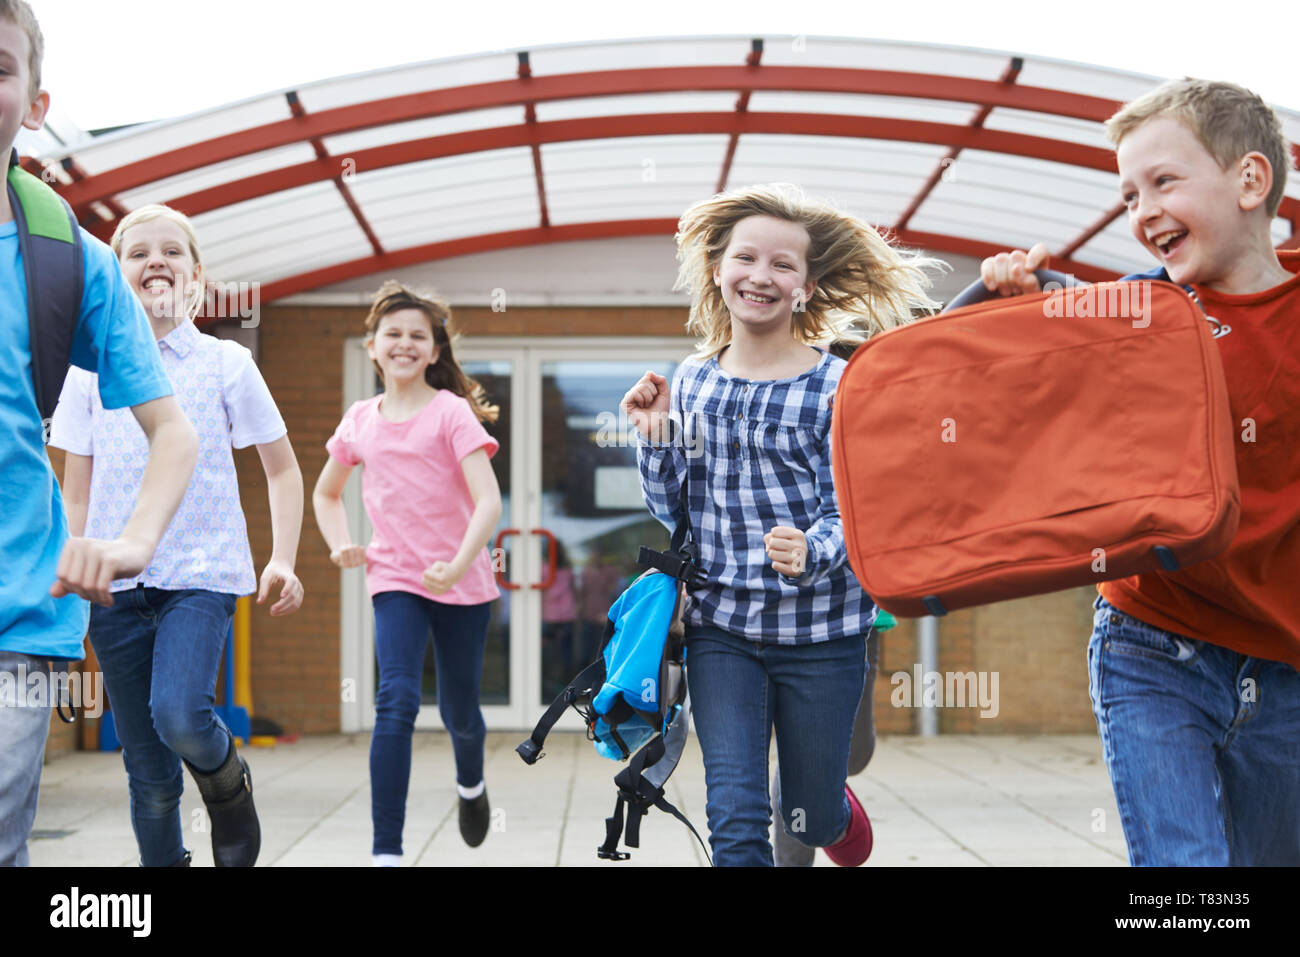 Group Of Elementary School Pupils Outside Classroom At End Of Lessons Running Across Playground Stock Photo